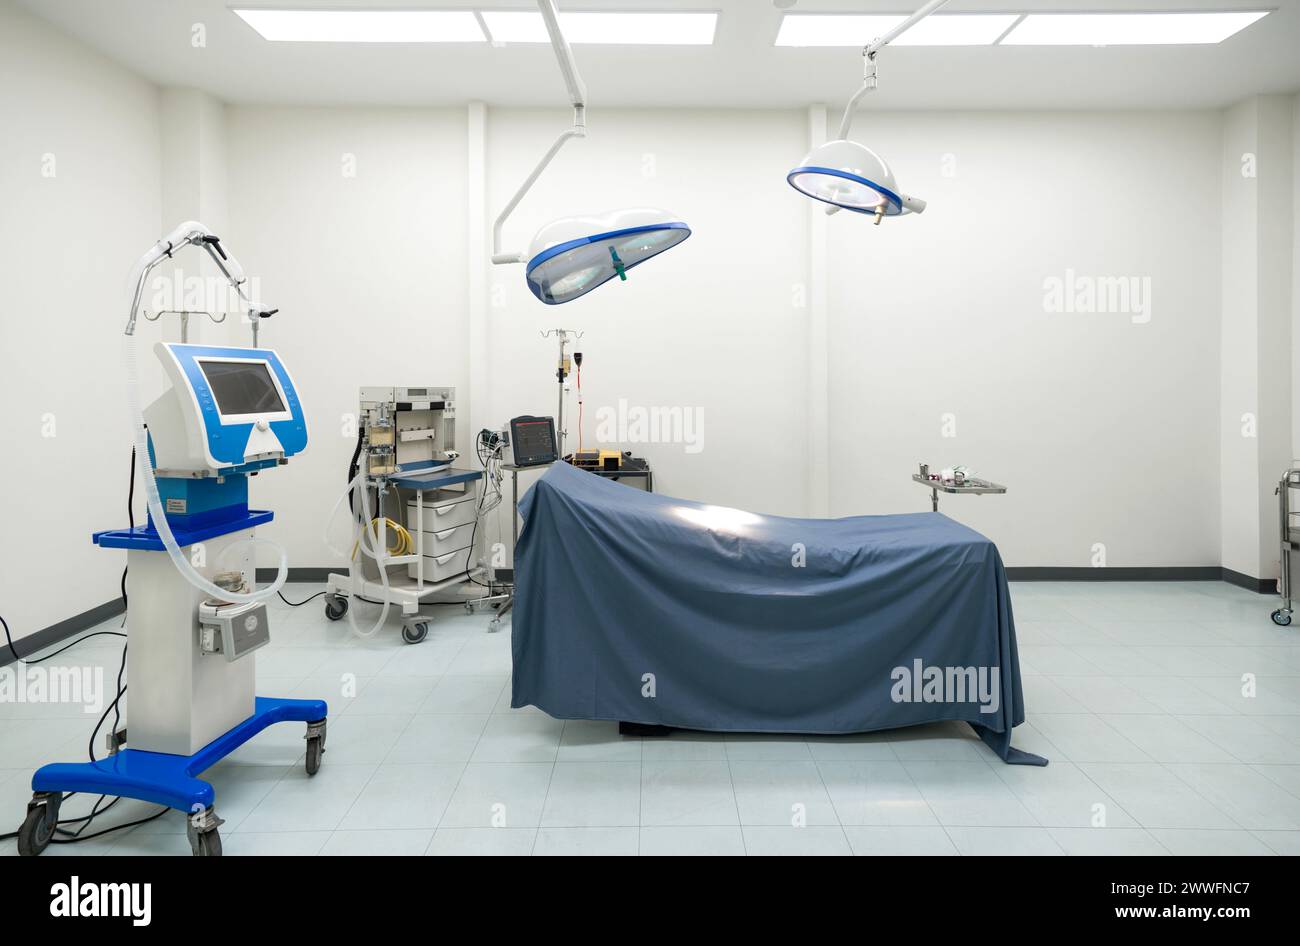 A typical operating room in a hospital with surgical light overhead for providing bright, directional lighting to the surgical team during procedure. Stock Photo